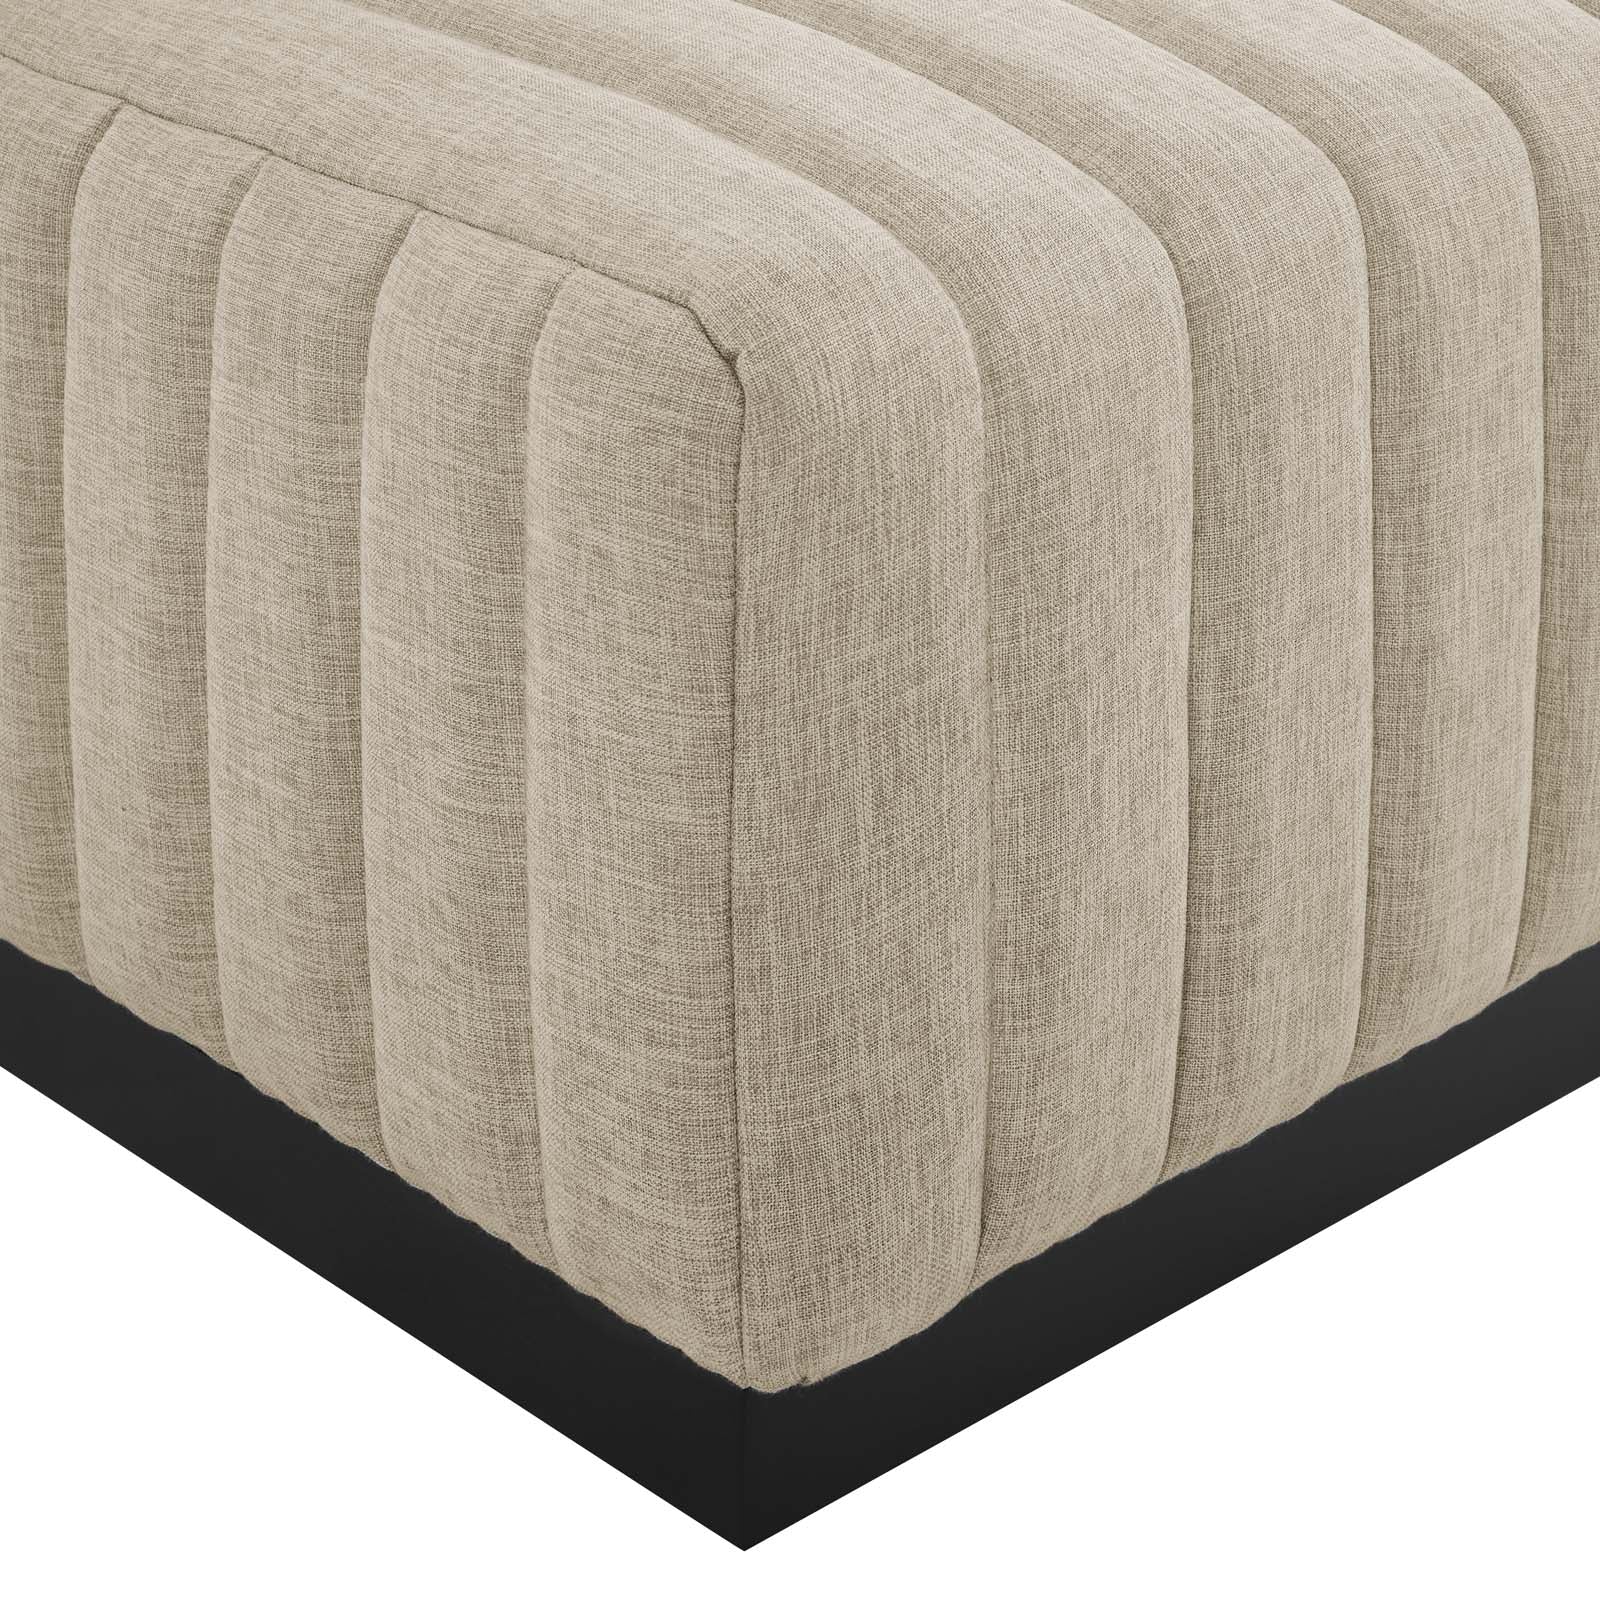 Modway Sectional Sofas - Conjure Channel Tufted Upholstered Fabric 5-Piece Sectional Black Beige